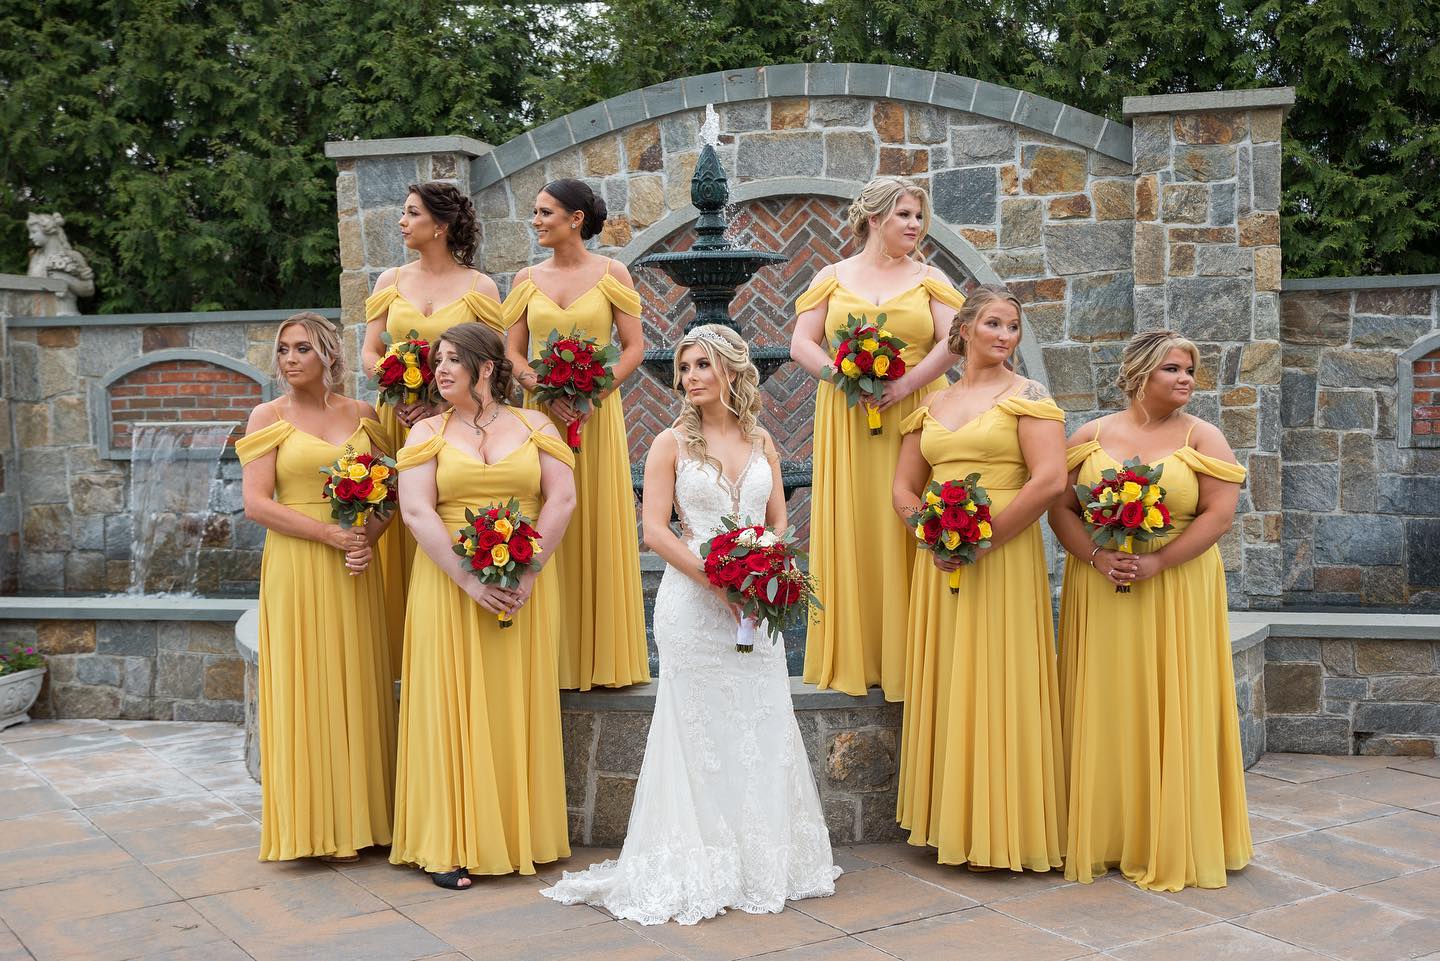 Tips for Choosing Your Wedding Colors